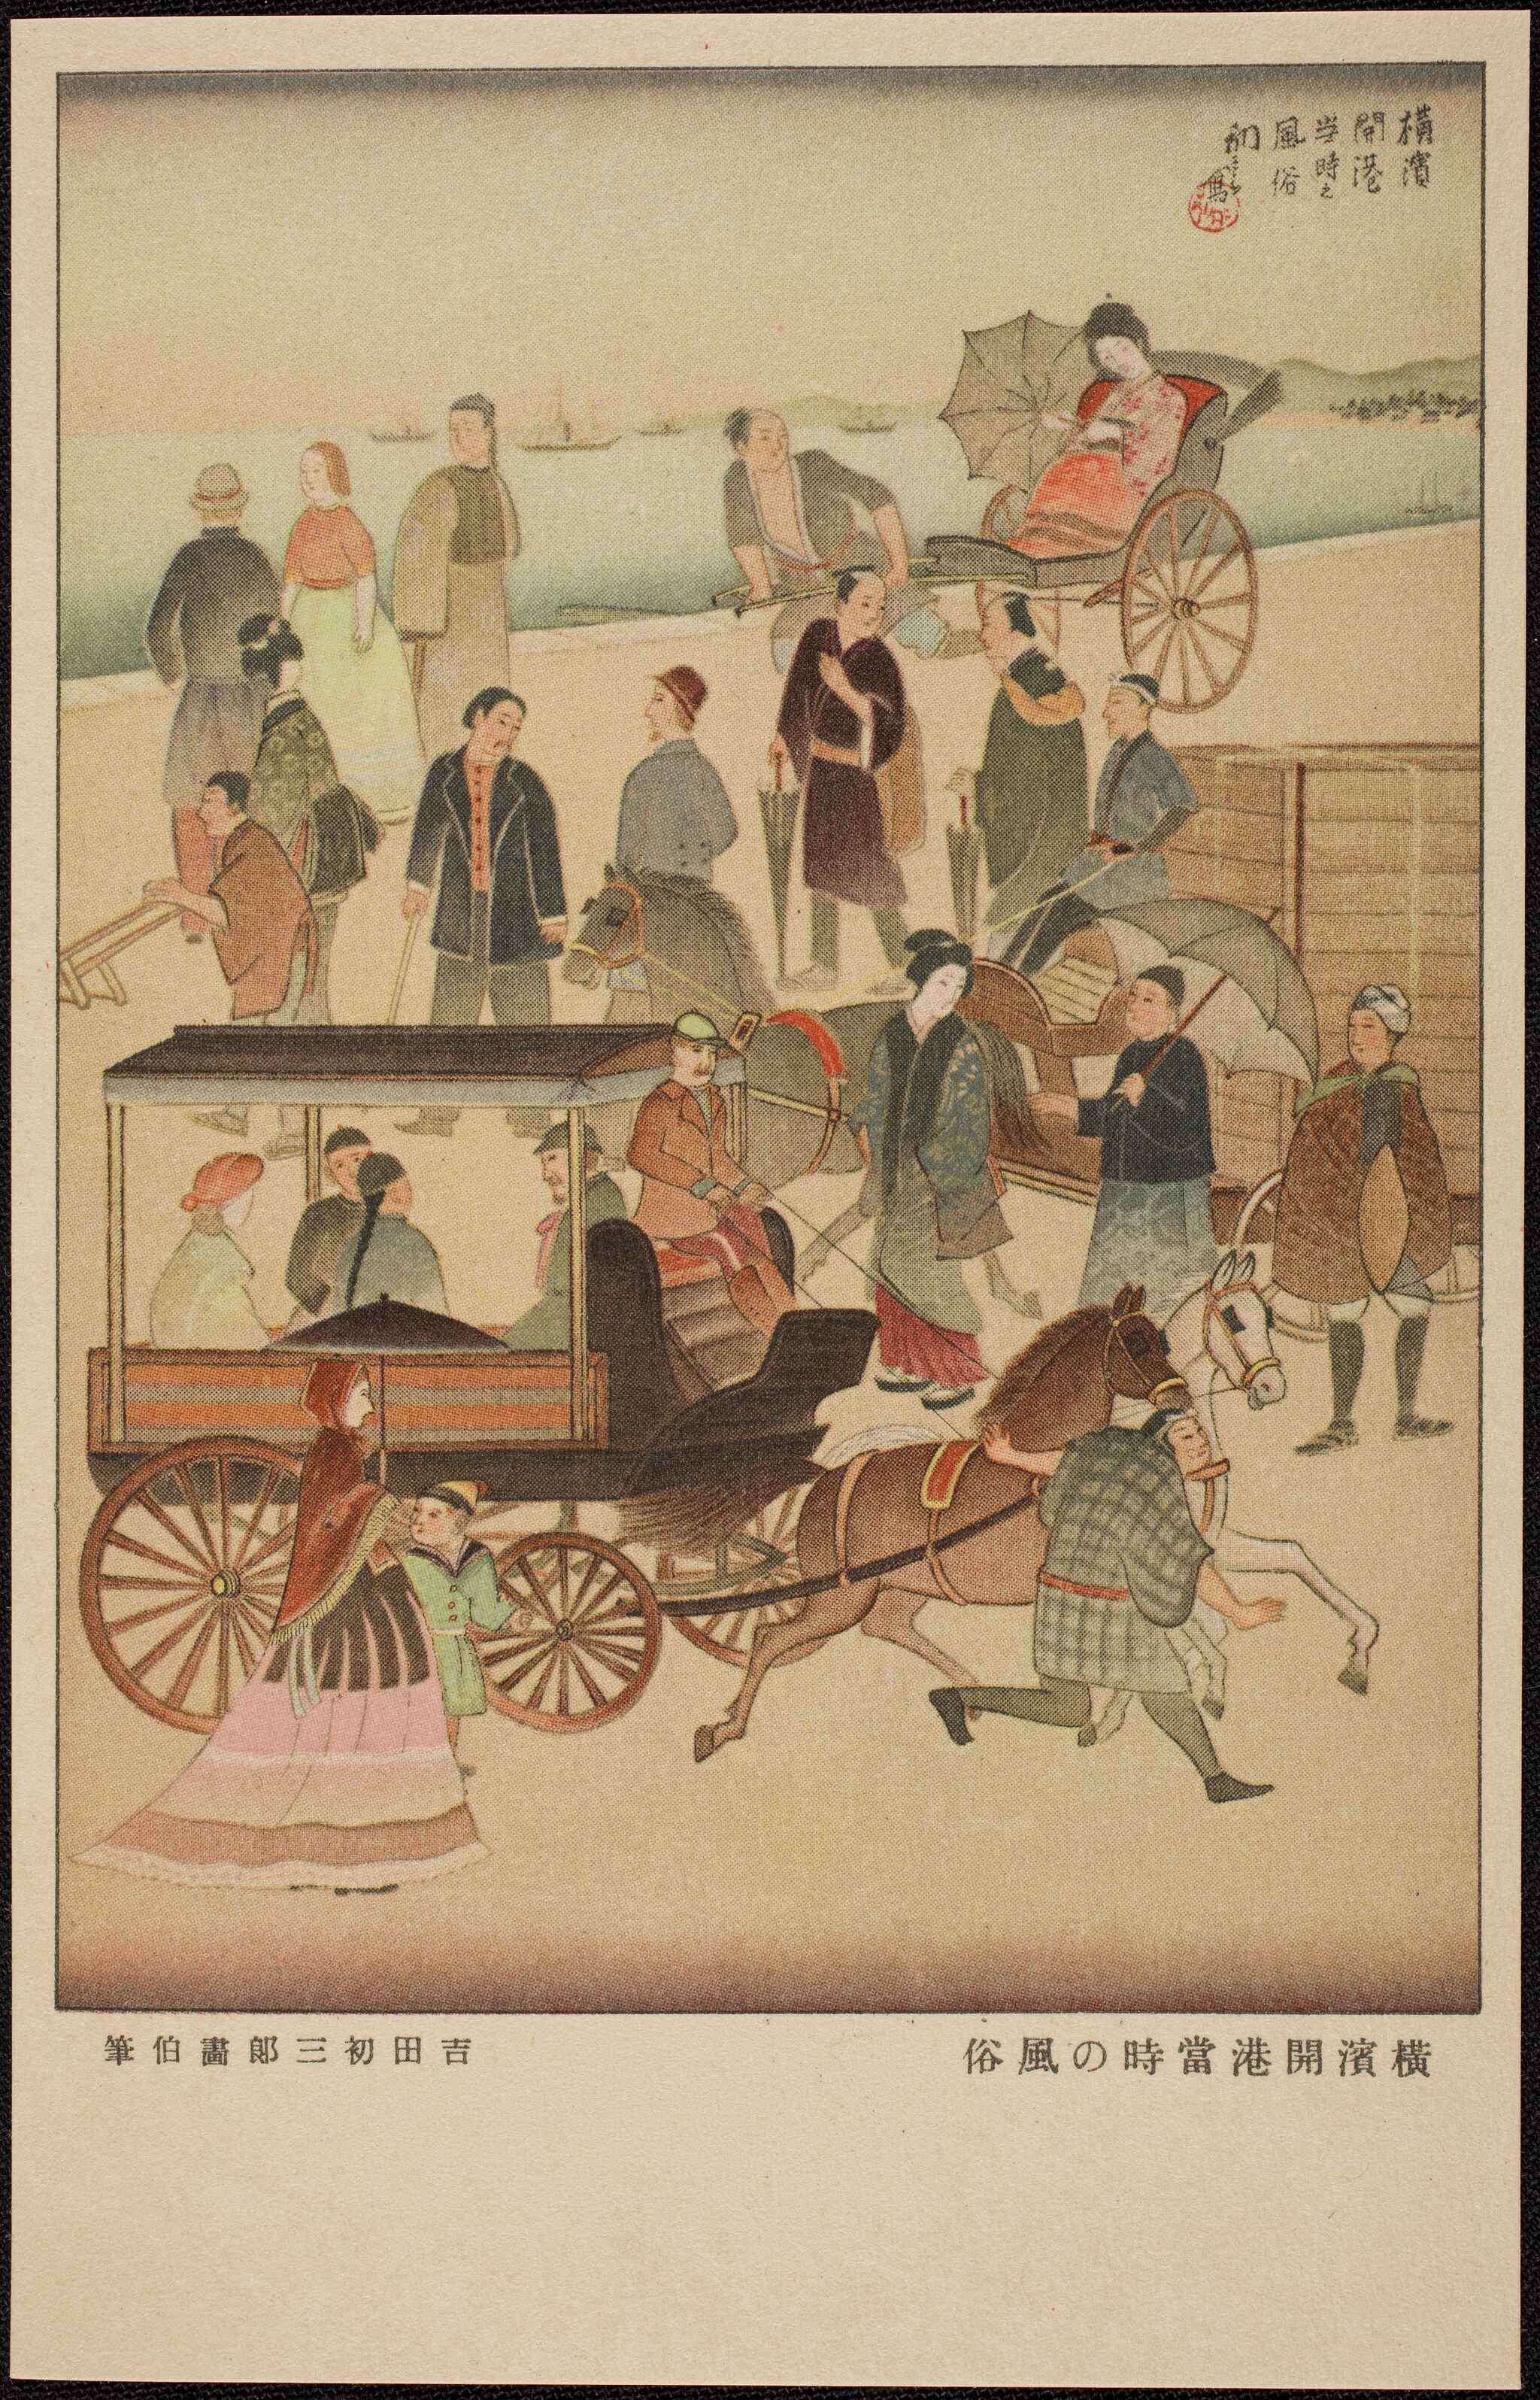 Coloured image of a streetscape with Japanese and Western figures, including a woman in a rickshaw and a horse driven carriage